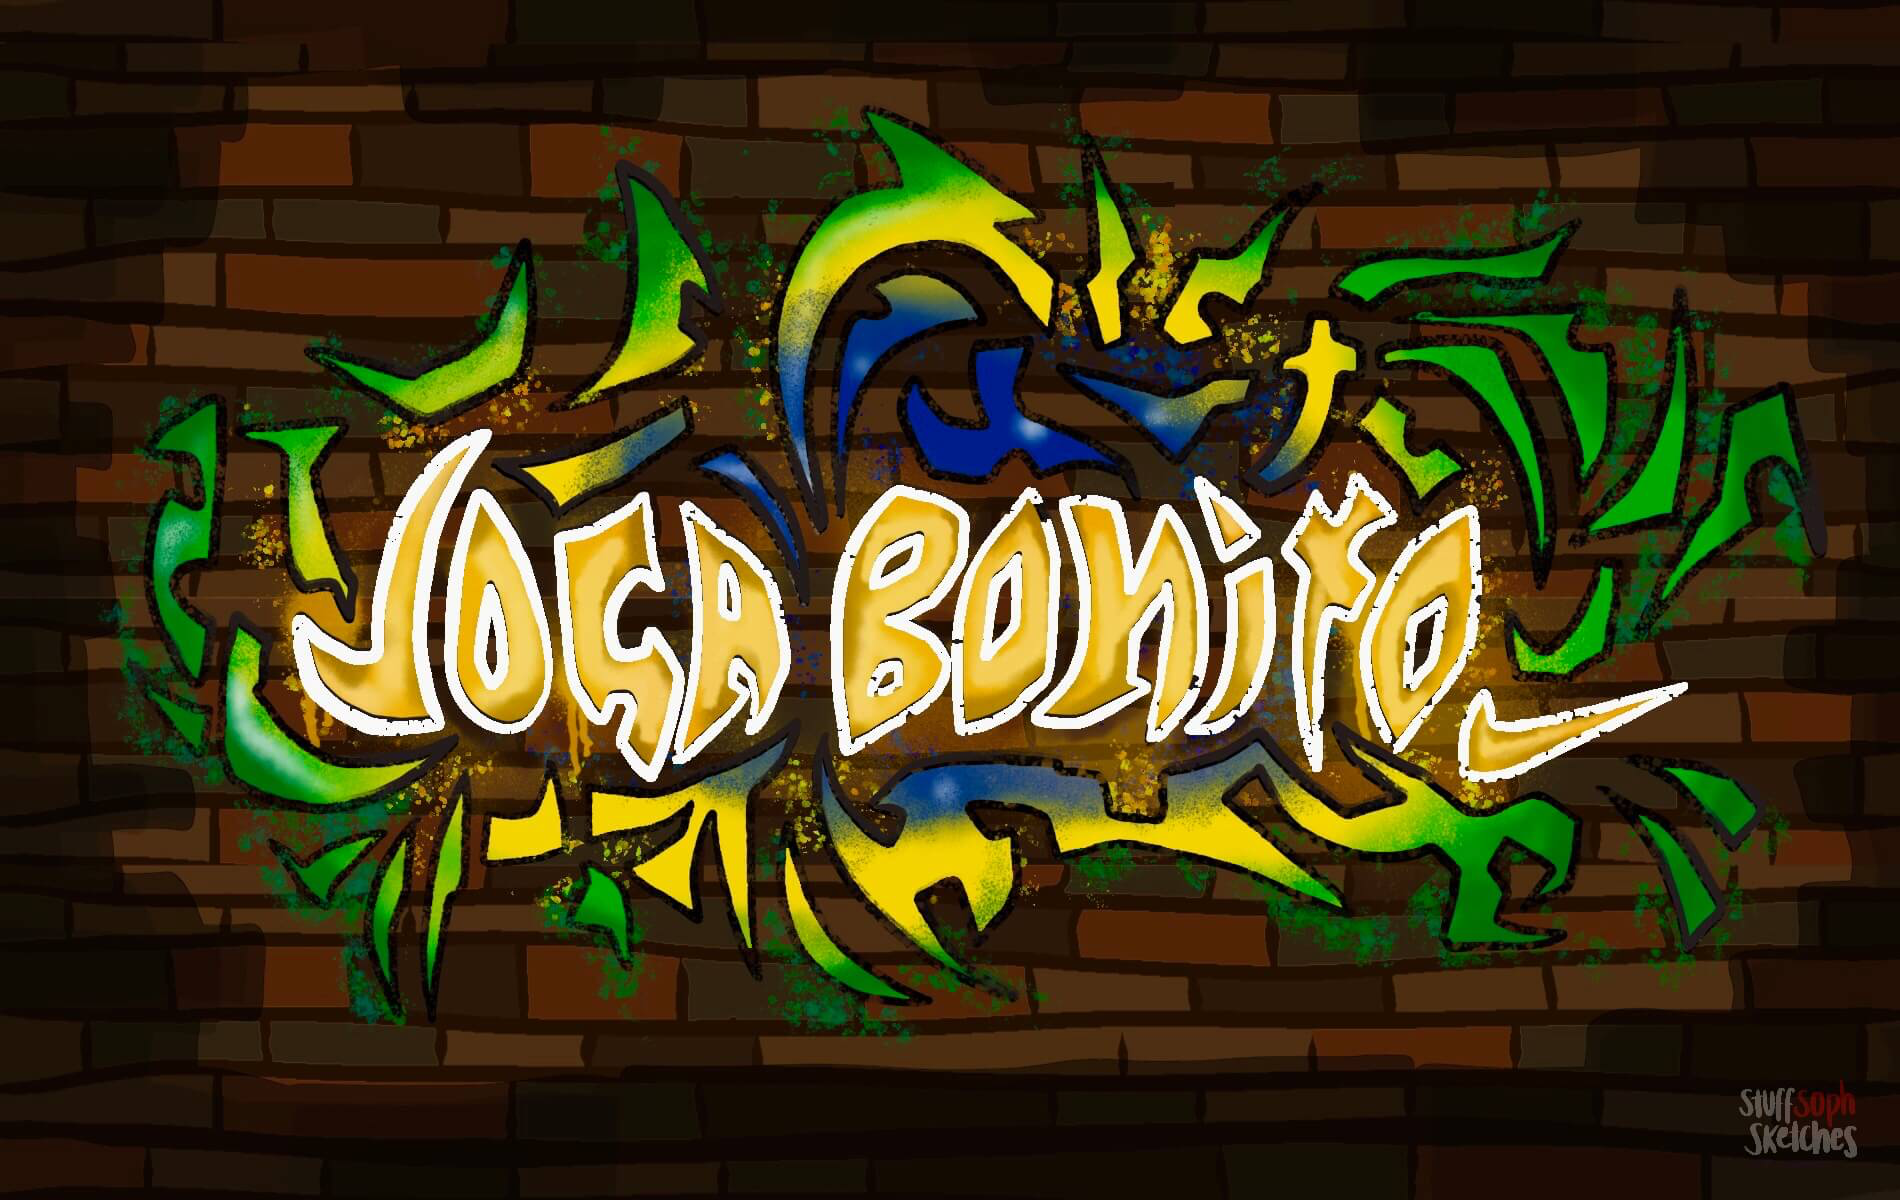 Joga Bonito in gold lettering spray painted on brick wall, with colour-full accents